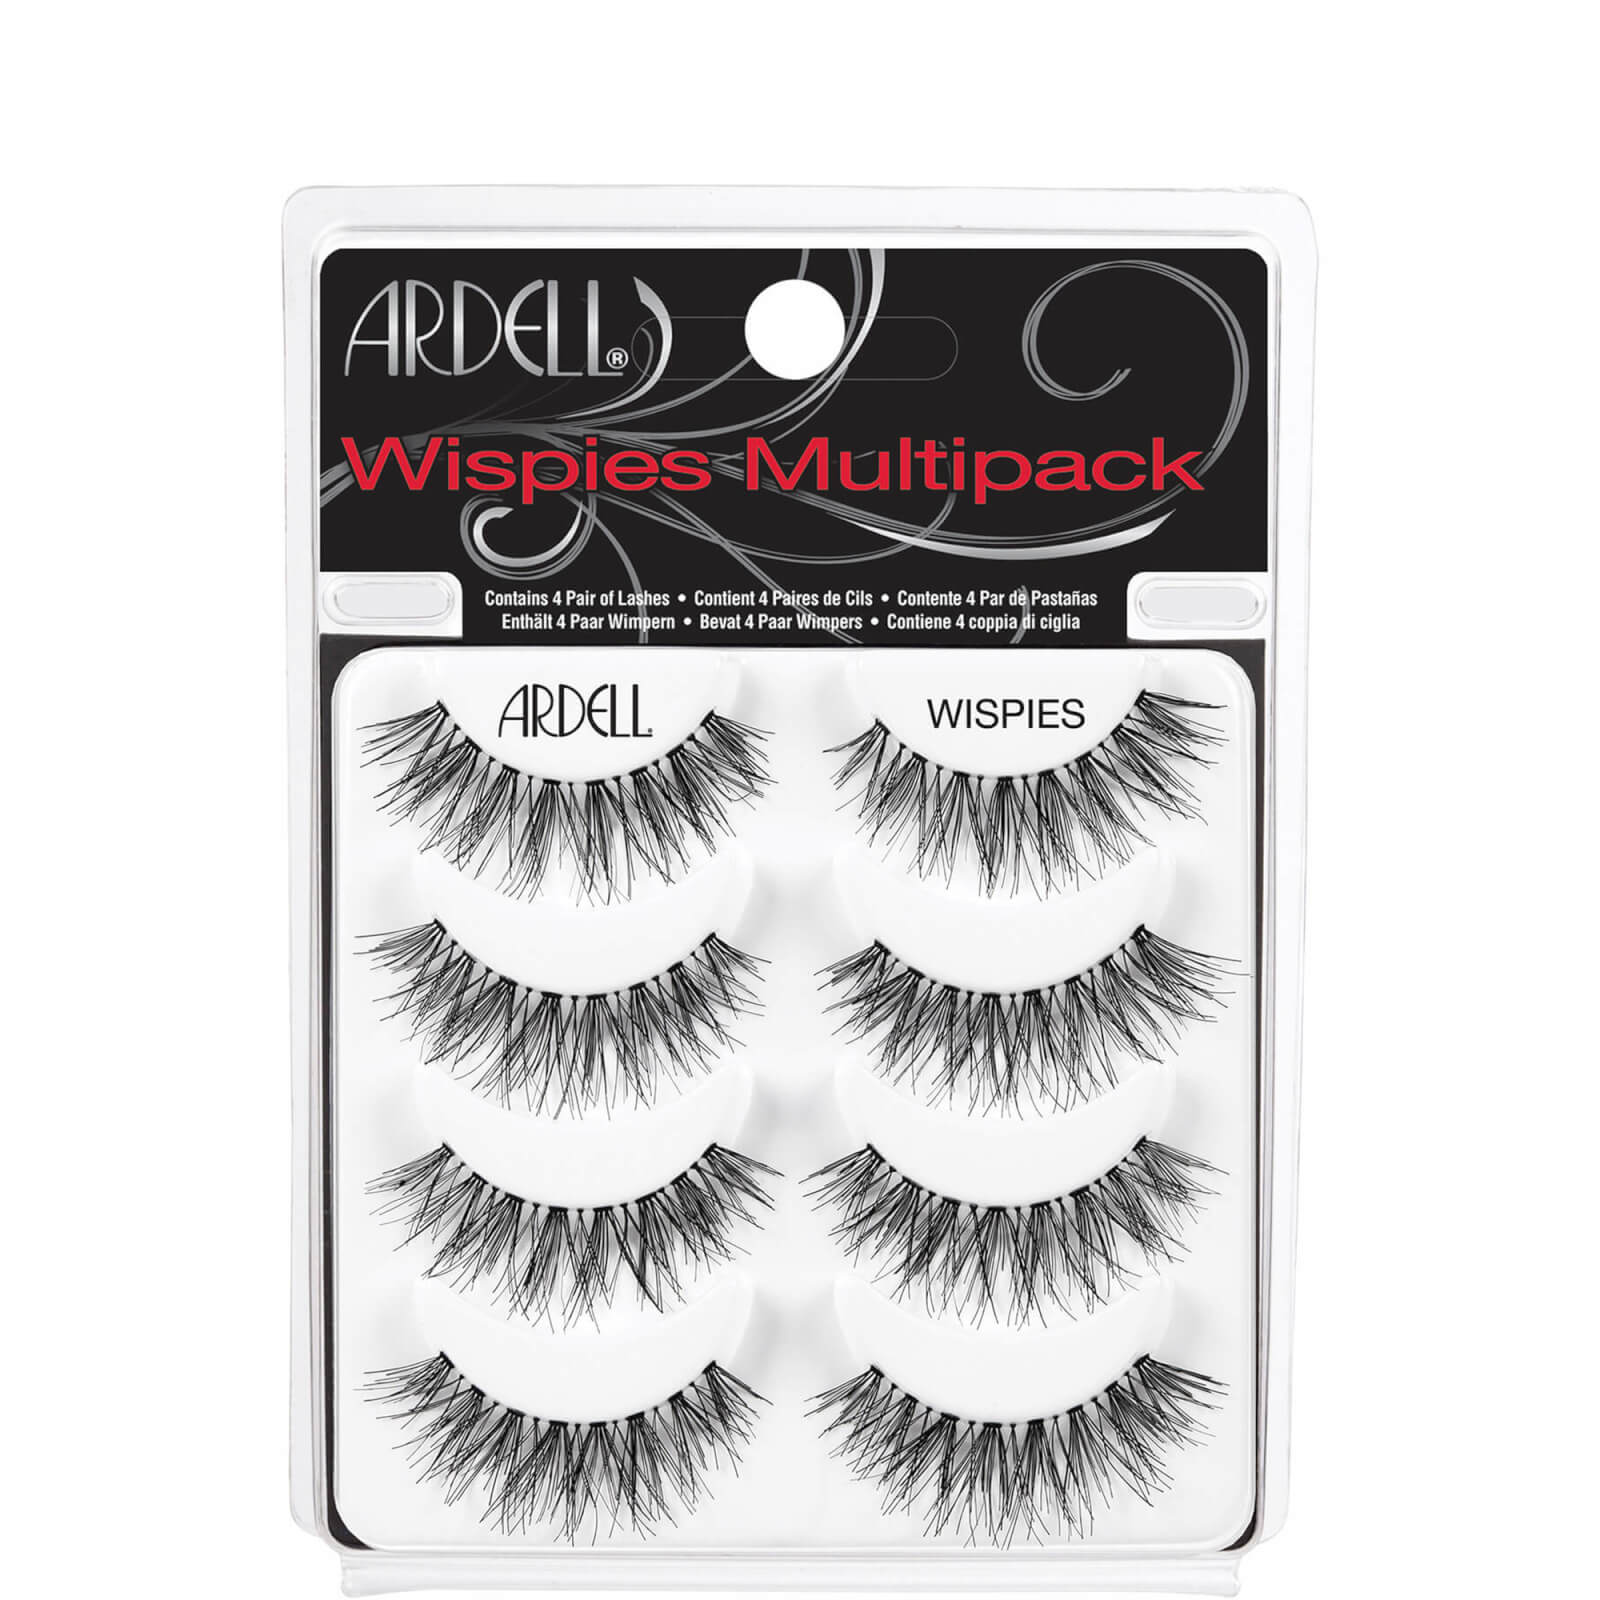 Image of Ardell Multipack Wispies (4 Pack)